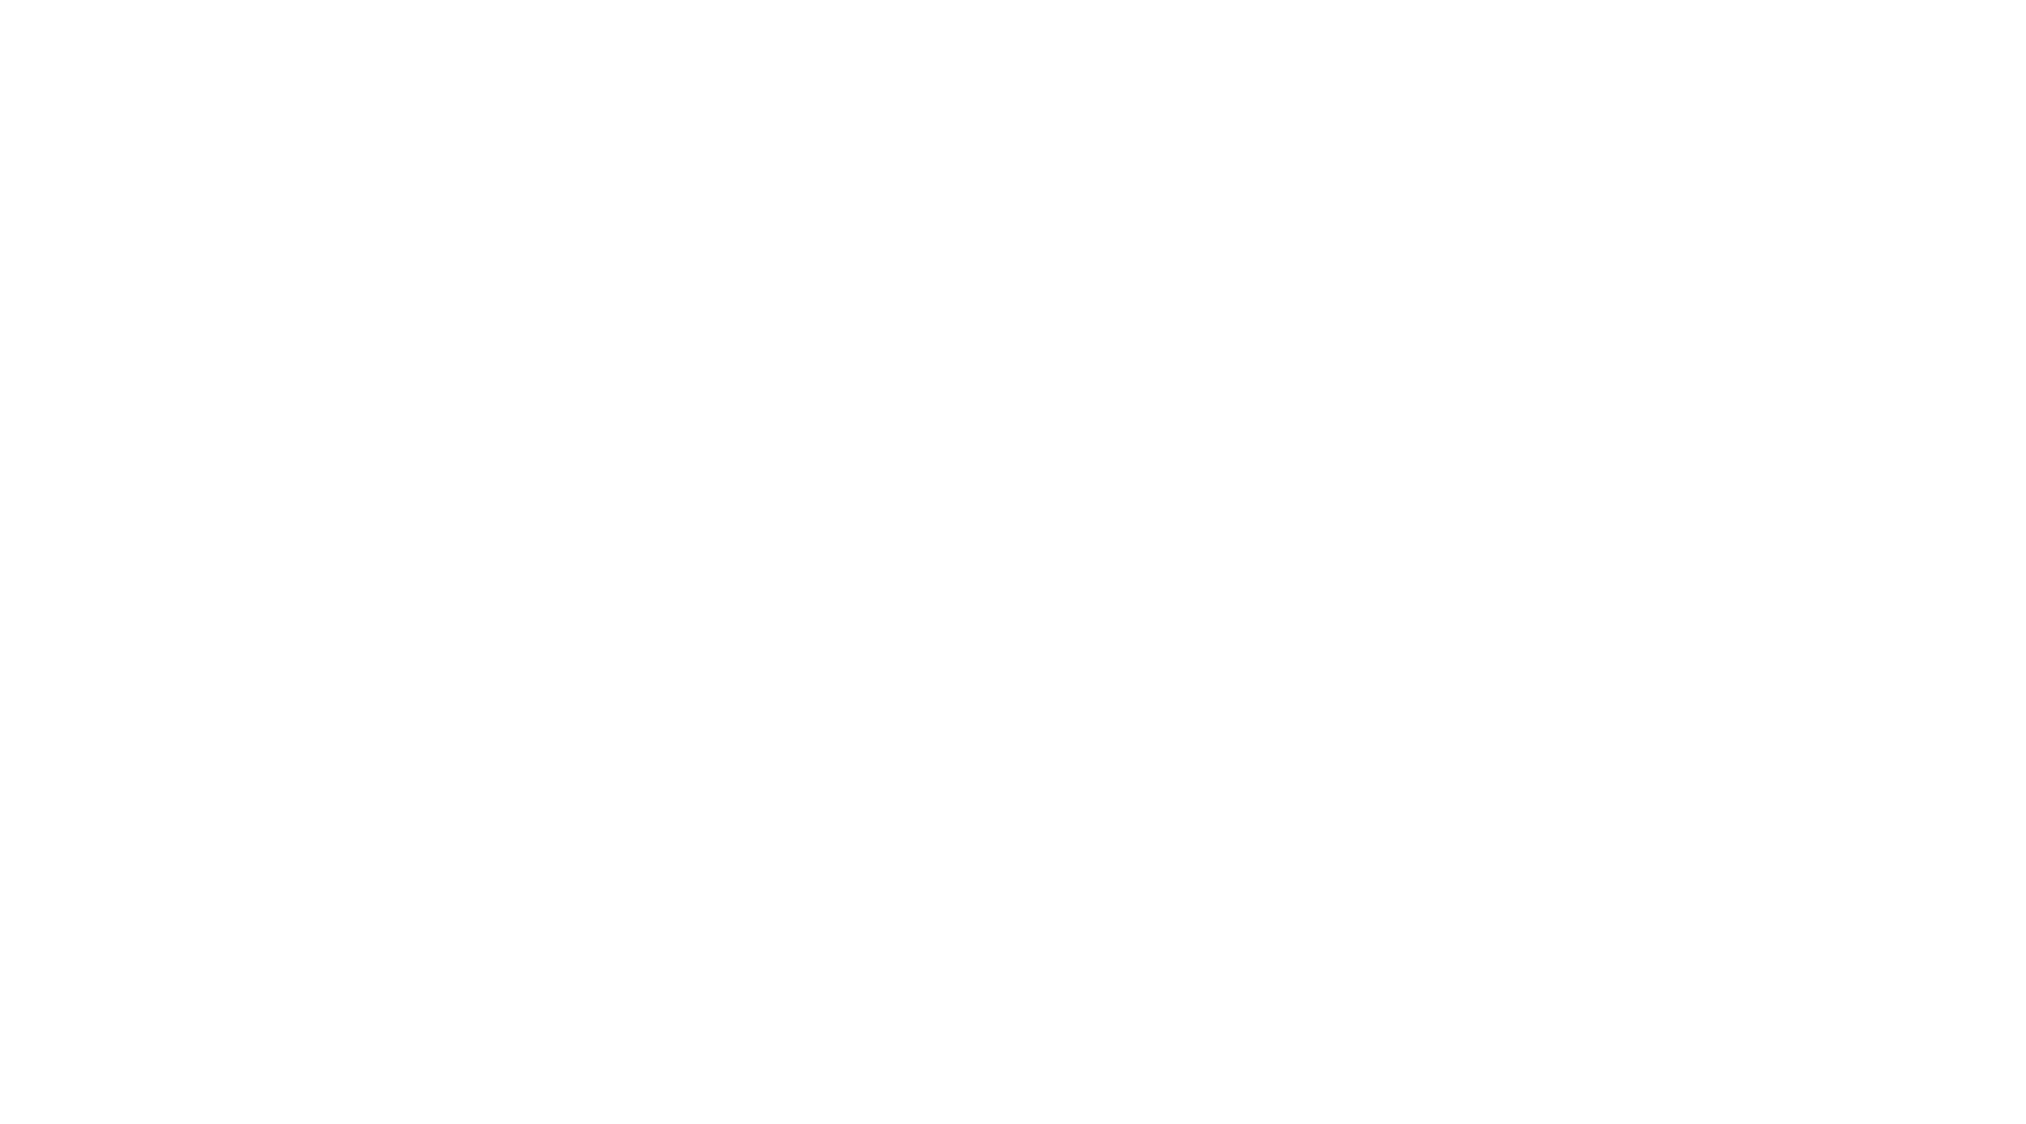 Rider support - FX Racing Inc